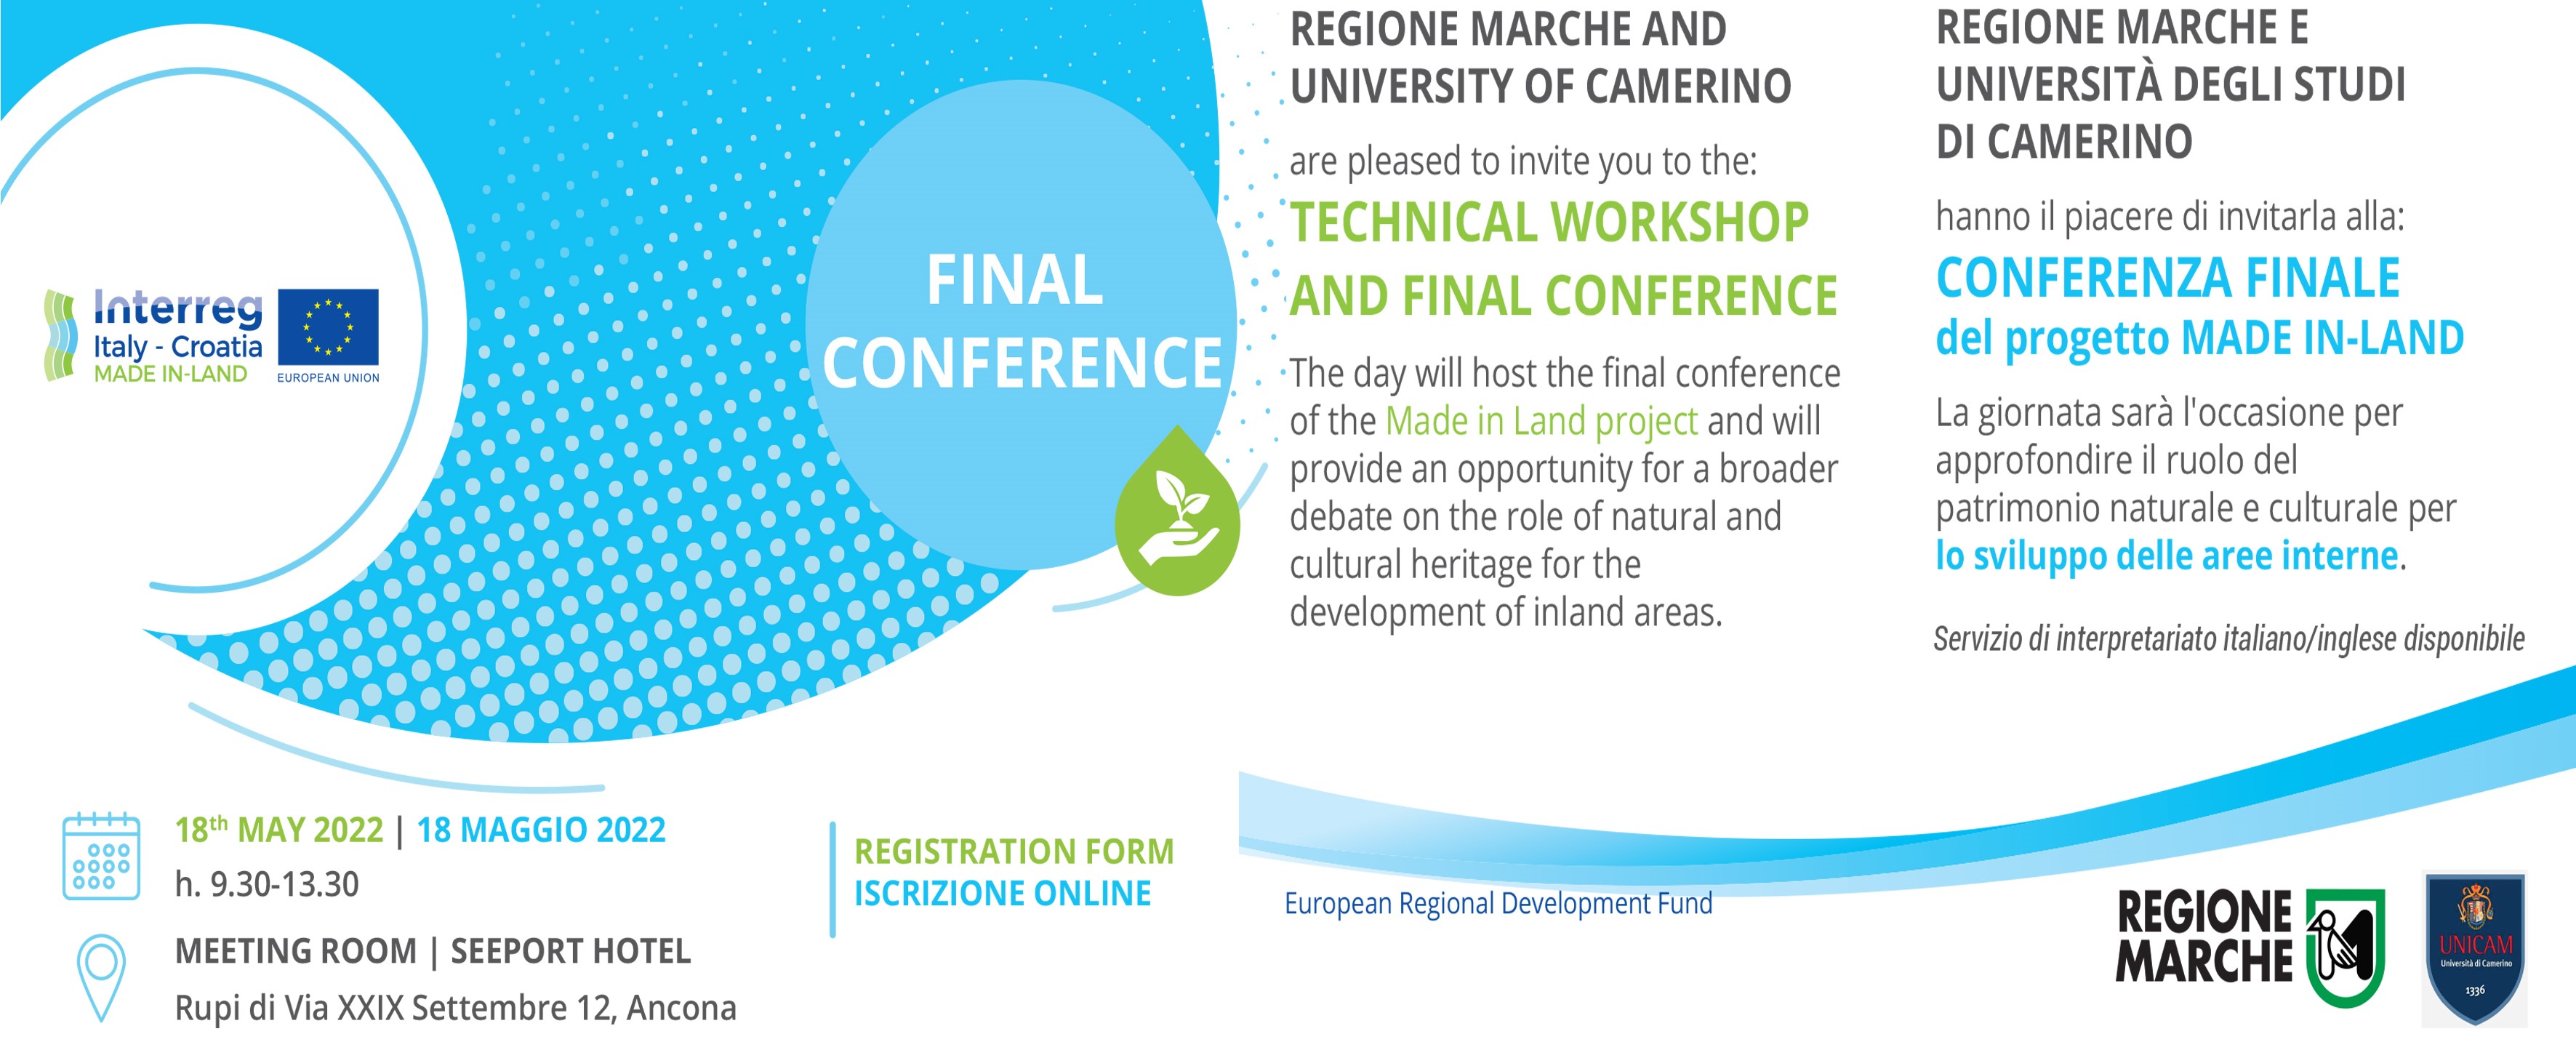 Technical Workshop & Final Conference Ancona, 18th of May 2022